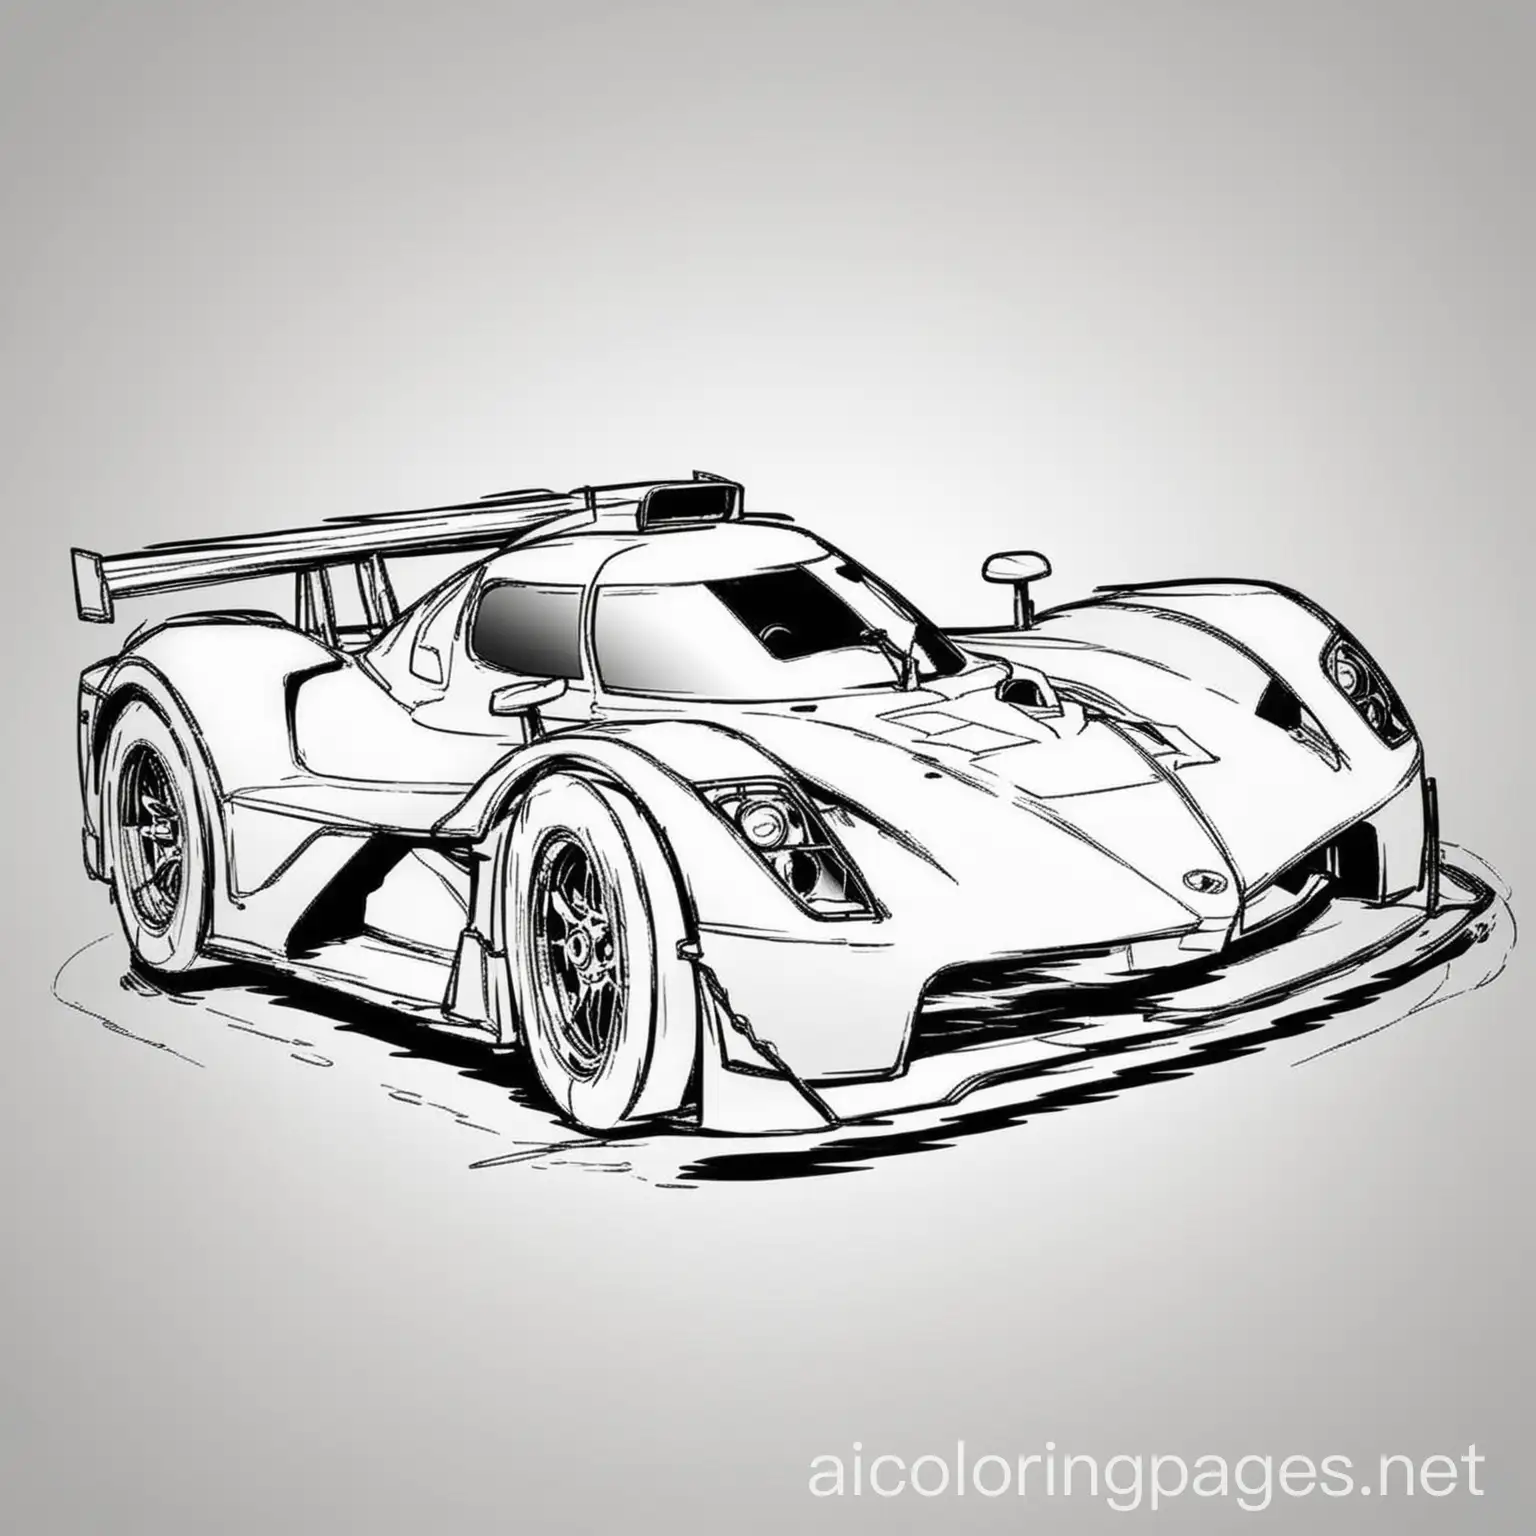 fast racing car coloring page
, Coloring Page, black and white, line art, white background, Simplicity, Ample White Space. The background of the coloring page is plain white to make it easy for young children to color within the lines. The outlines of all the subjects are easy to distinguish, making it simple for kids to color without too much difficulty